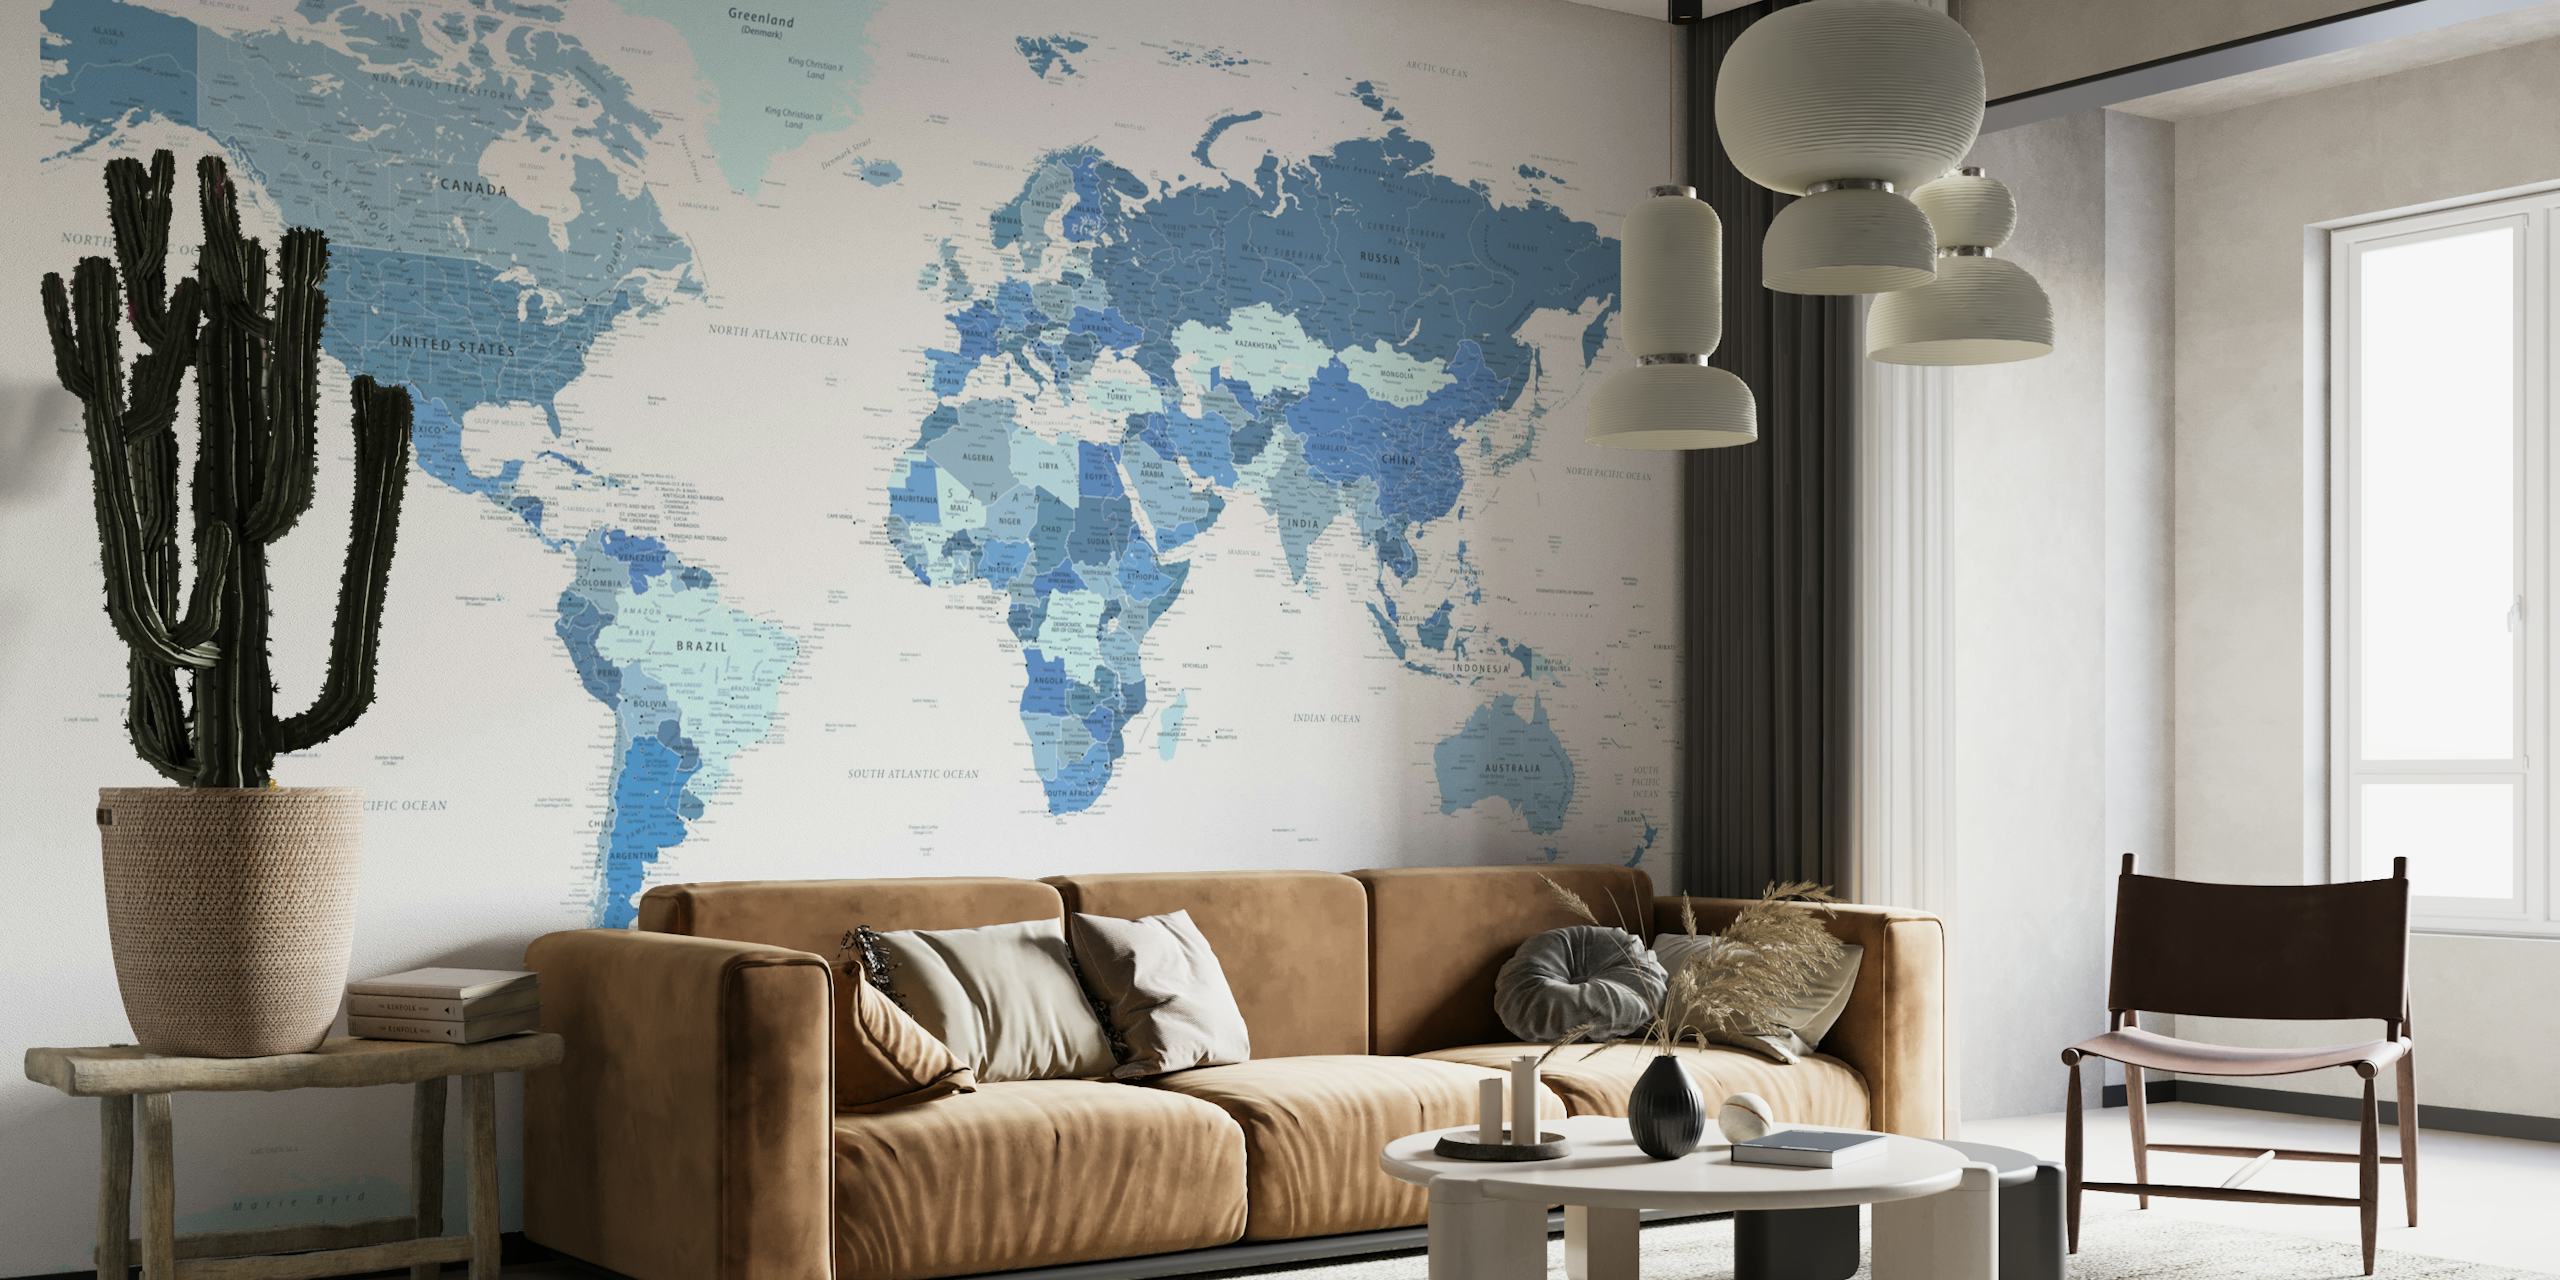 Highly Detailed World Map in Blue papel pintado